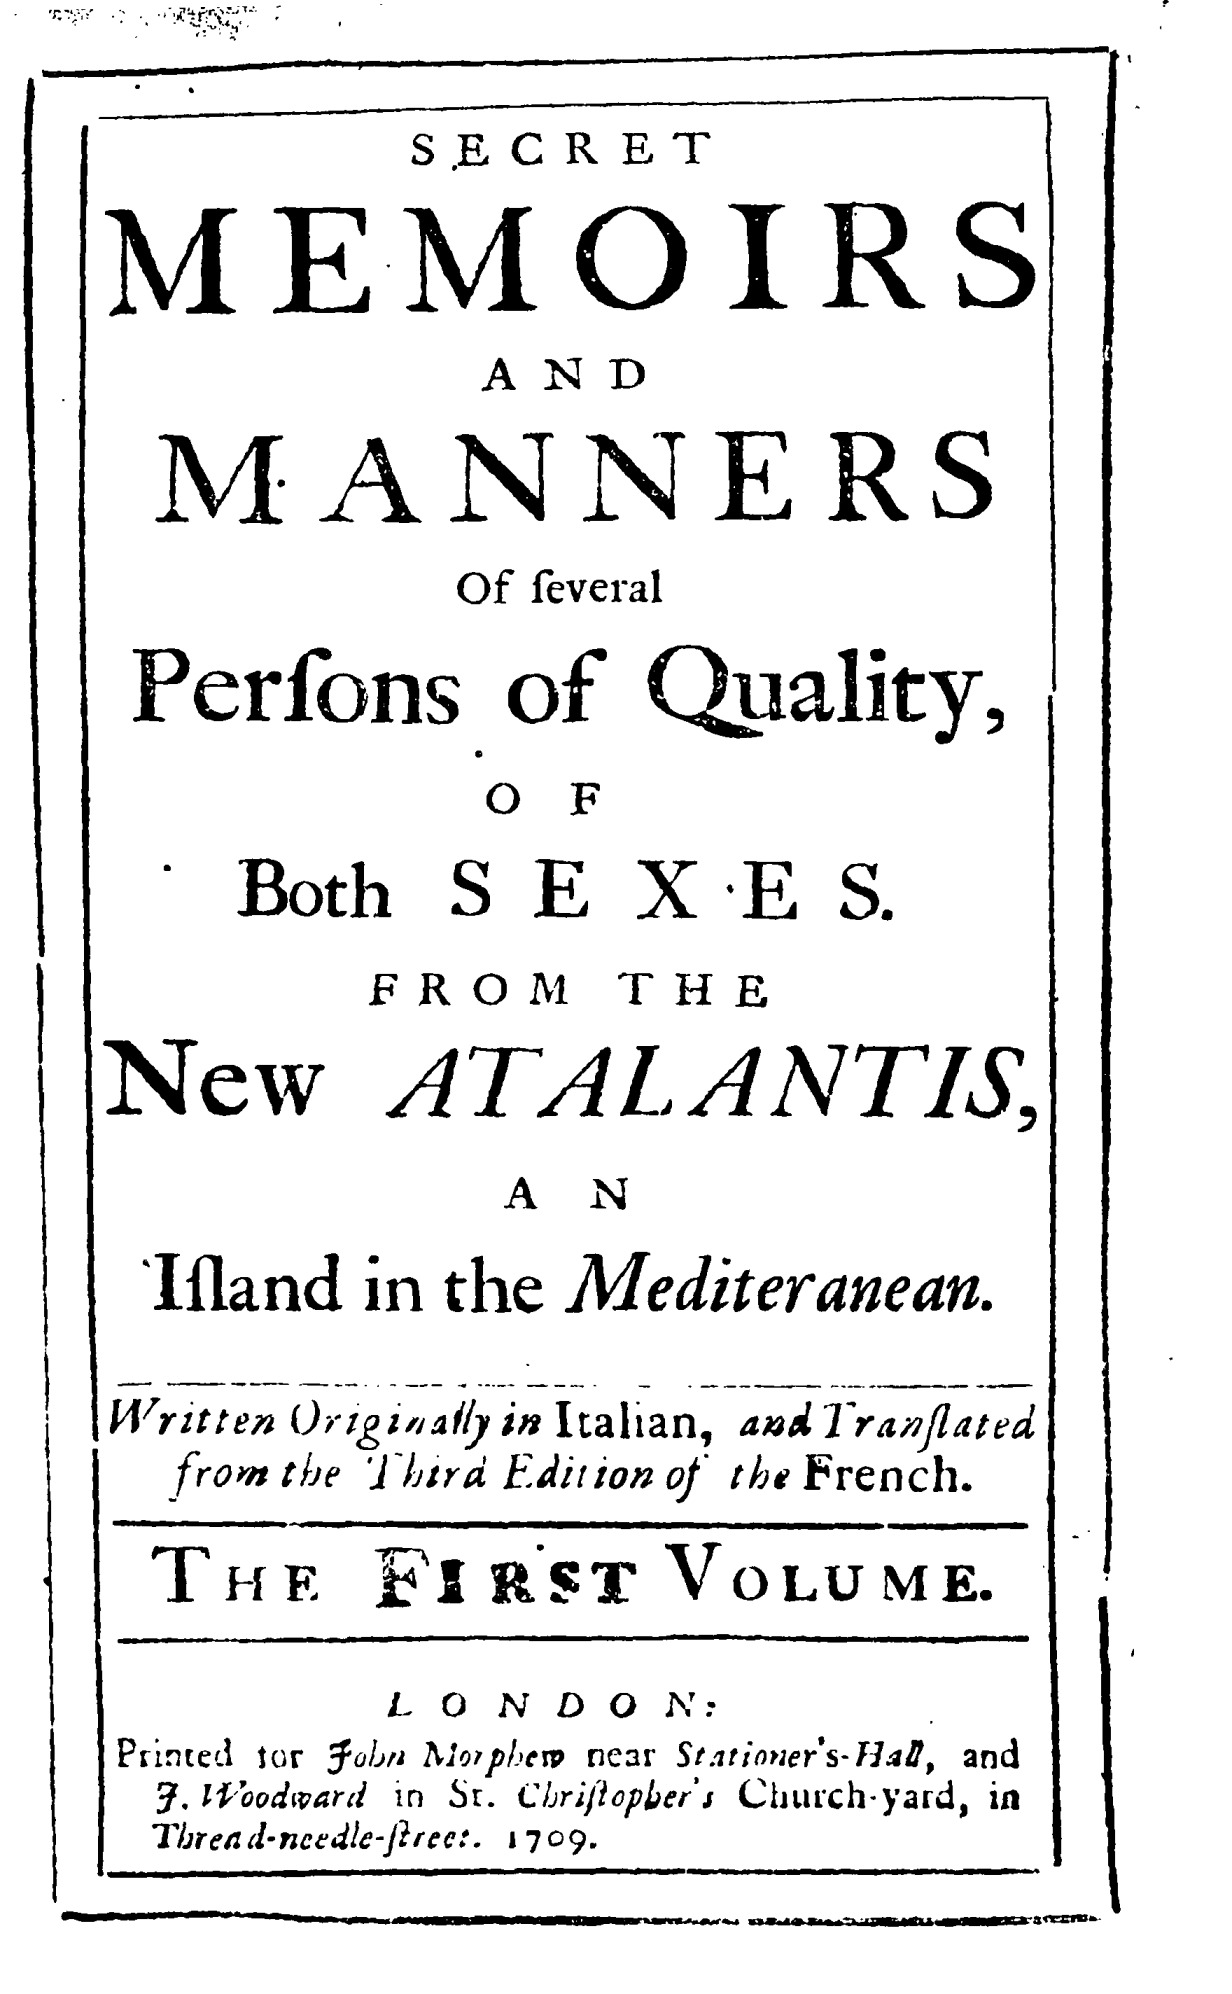 An image of "Secret memoirs and manners of several persons of quality, of both sexes. From the new Atalantis, an island in the Mediteranean" published 1709. The imprint reads: "printed for John Morphew near Stationer's-Hall, and J. Woodward in St. Christopher's Church-Yard, in Thread-Needle-Street"